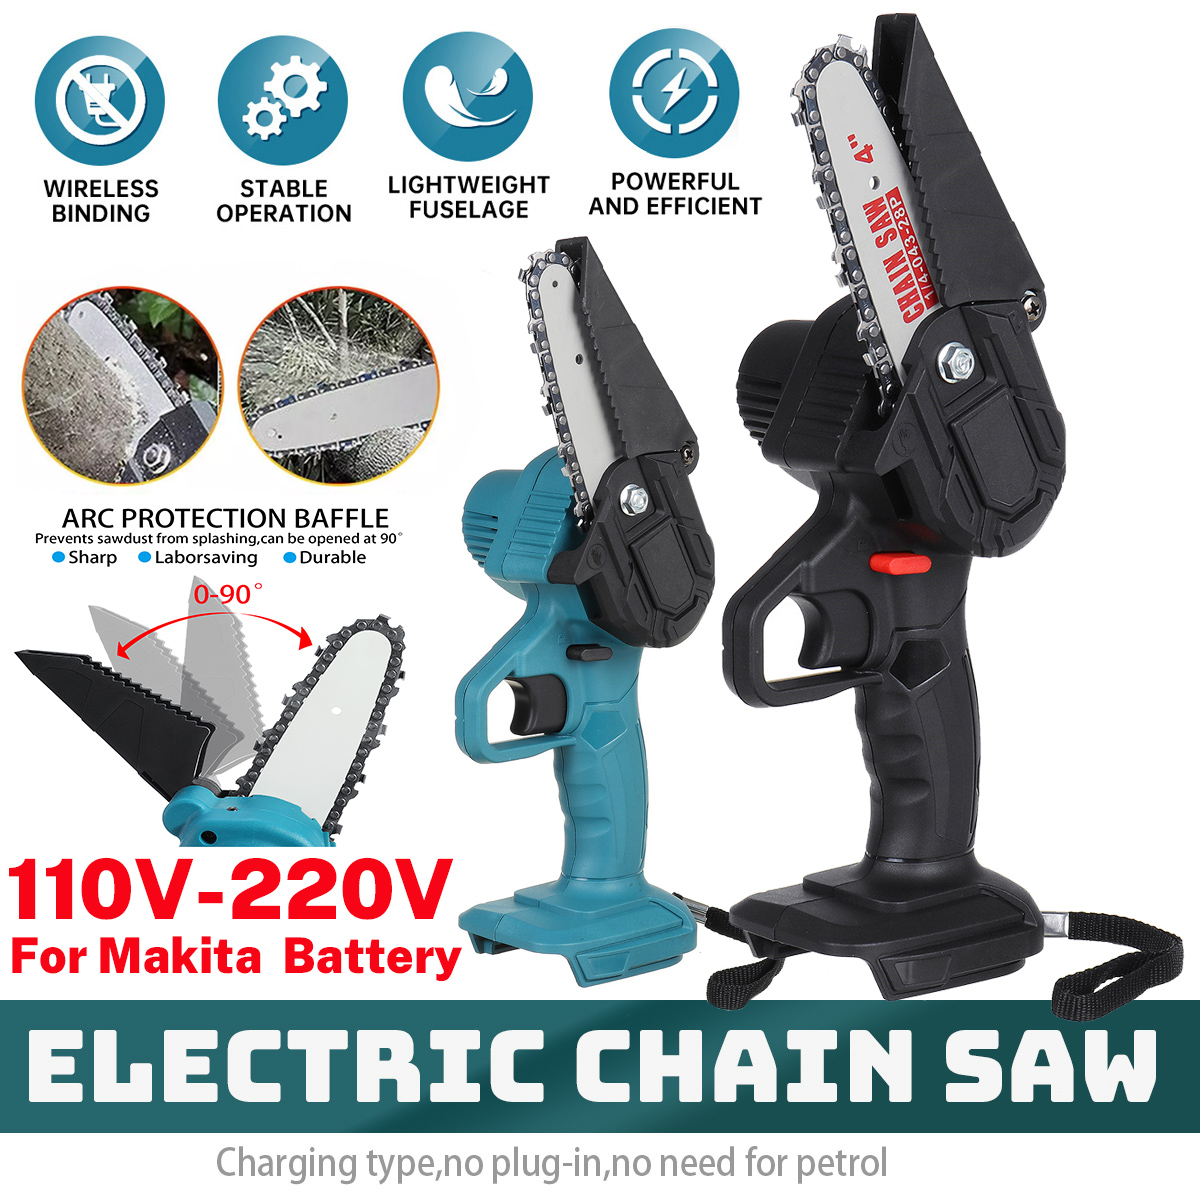 4-Inch-Portable-Electric-Chain-Saws-Woodworking-Tool-Wood-Saw-Cutter-Chainsaw-For-Makita-18V-Battery-1848662-2